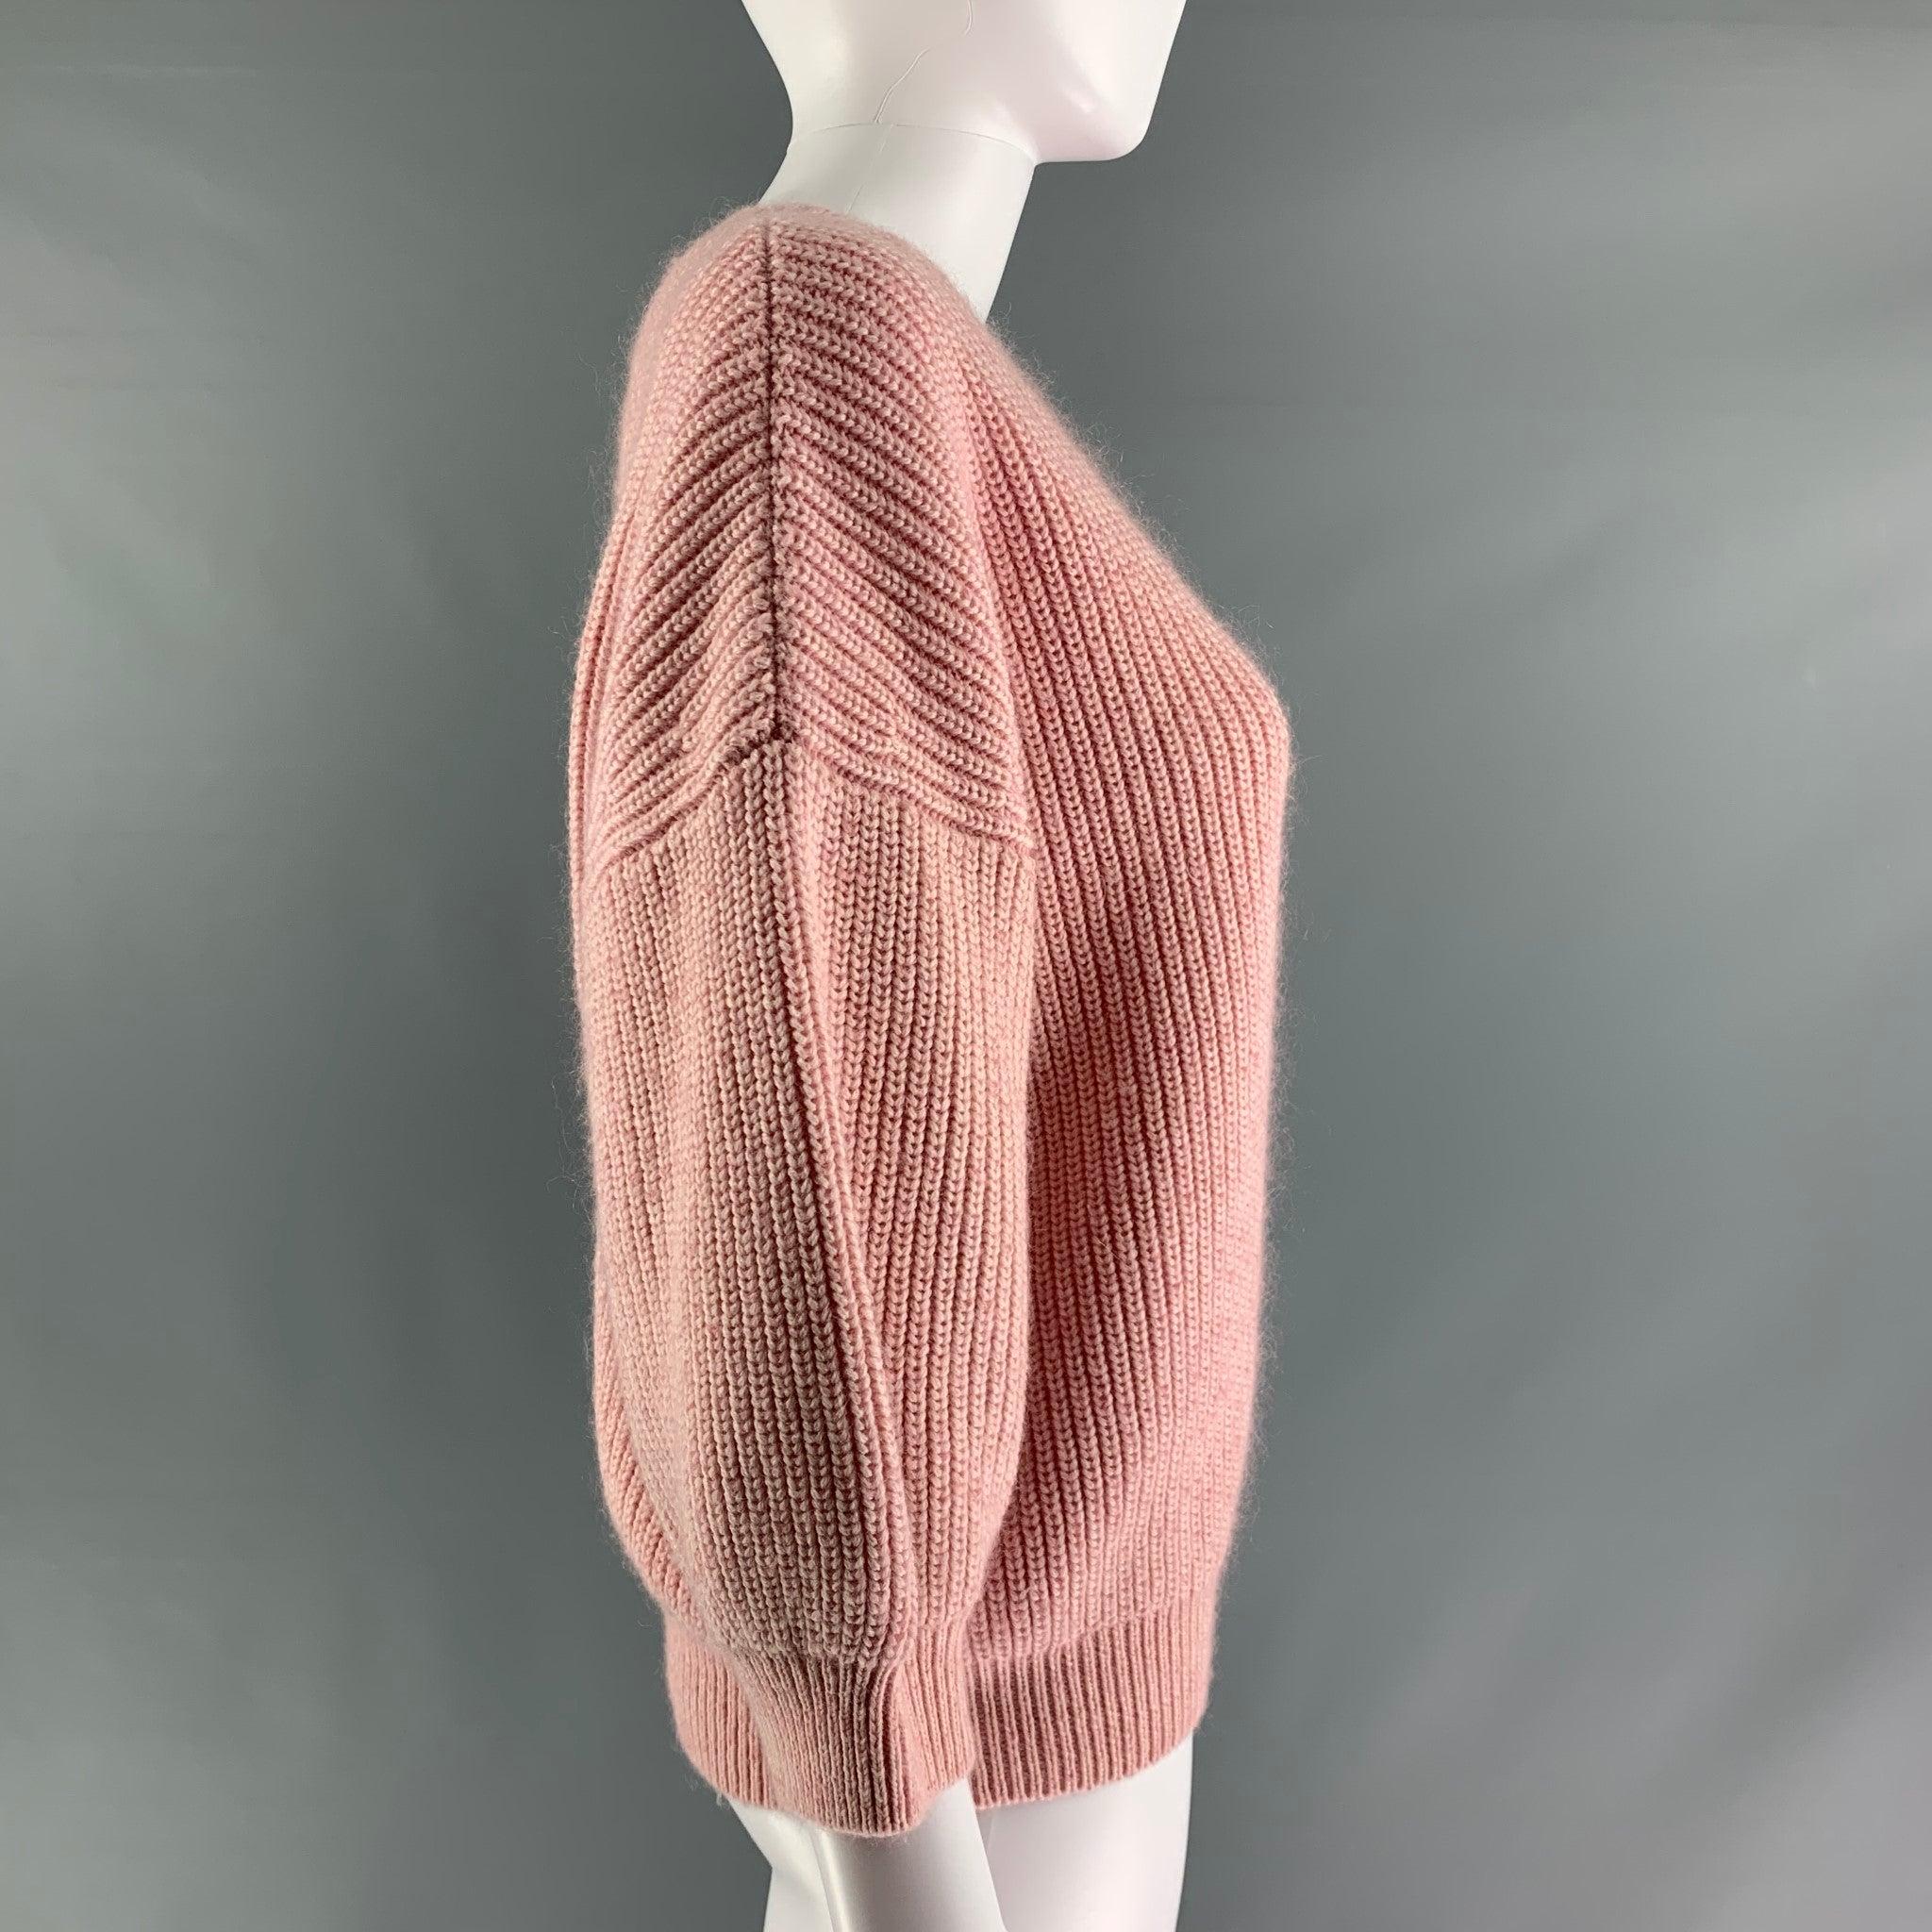 3.1 PHILLIP LIM sweater comes in pink wool and polyester heavy knit sweater featuring a cropped sleeve style, drop shoulder, and crew- neck.Very Good Pre-Owned Condition. Minor piling. 

Marked:   M 

Measurements: 
 
Shoulder: 20 inches Chest: 20